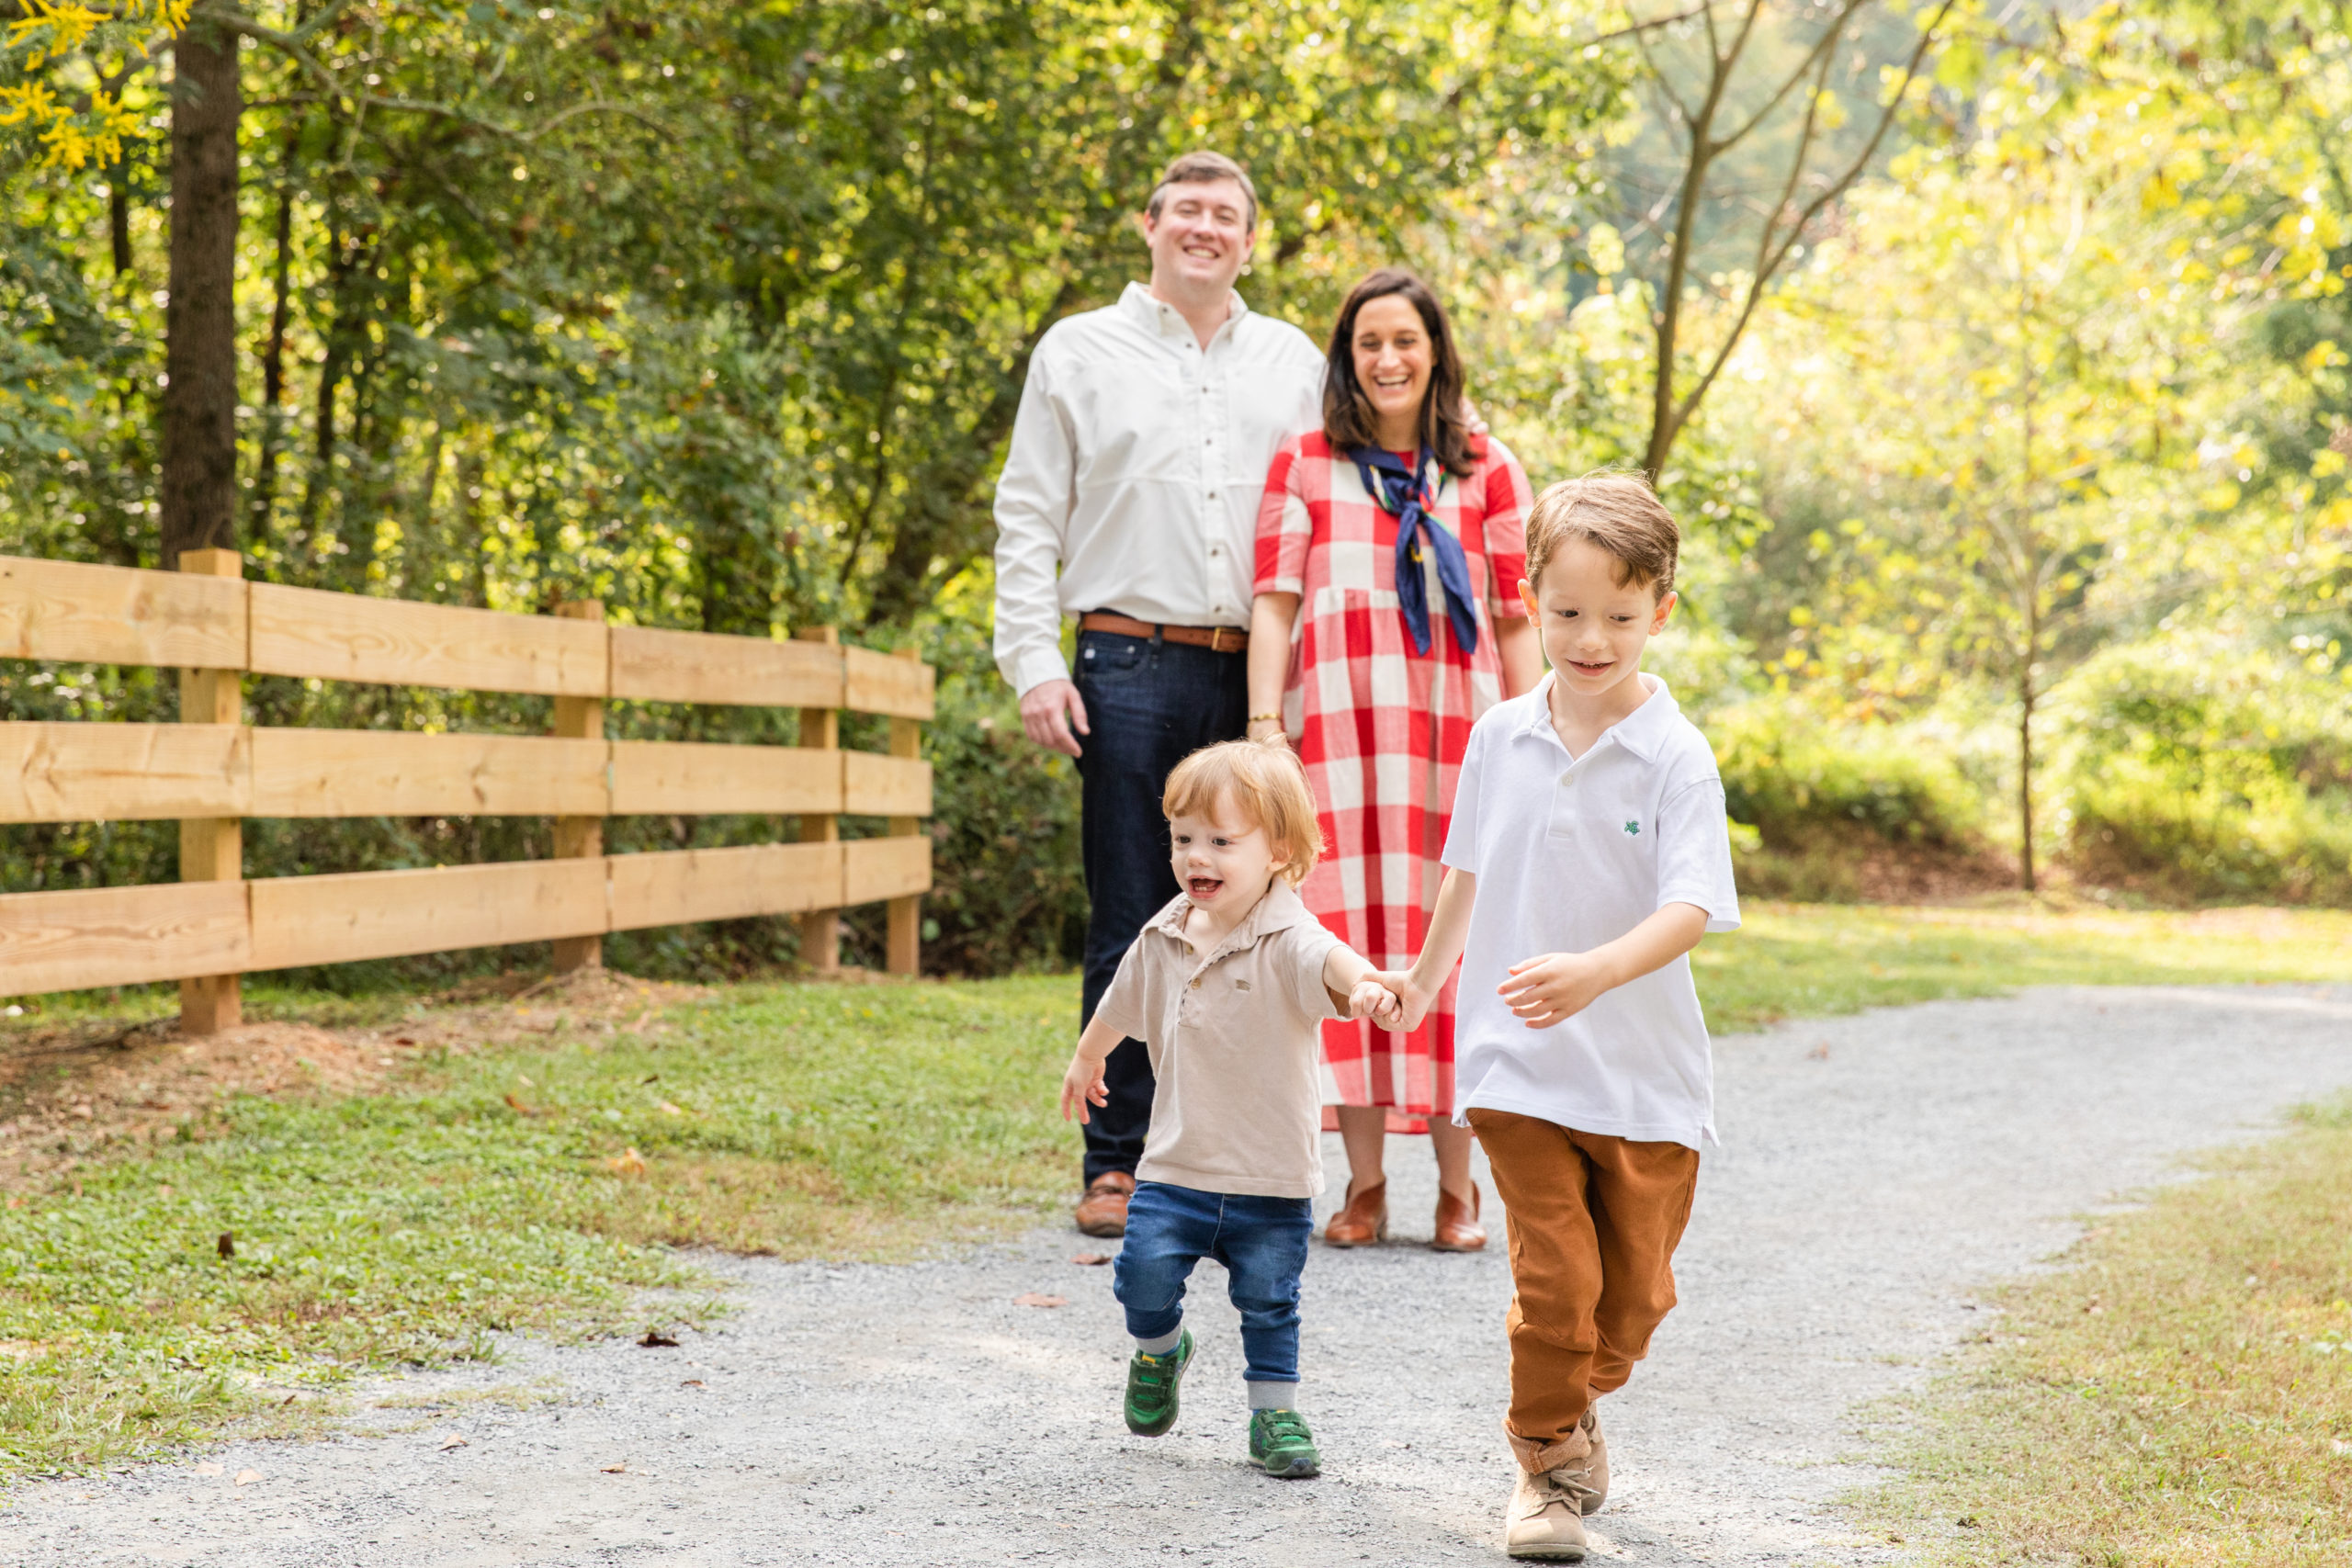 Best time of the day to organize family photoshoot toddlers running towards the camera an Sandy Spring Park | by Atlanta family photographer Laure Photography